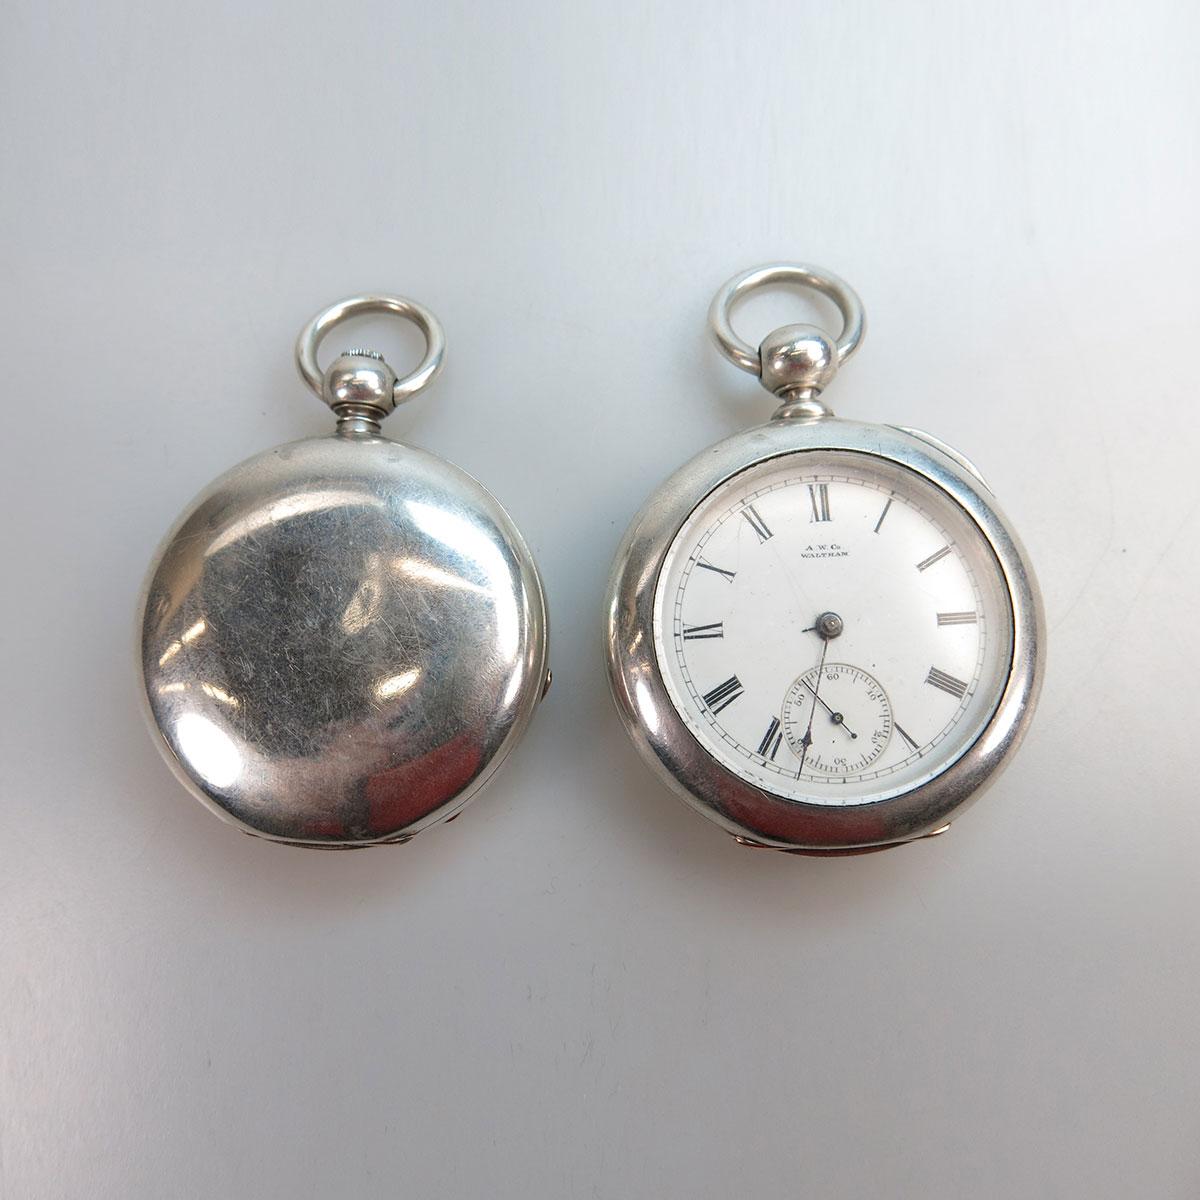 Waltham And Elgin Pocket Watches